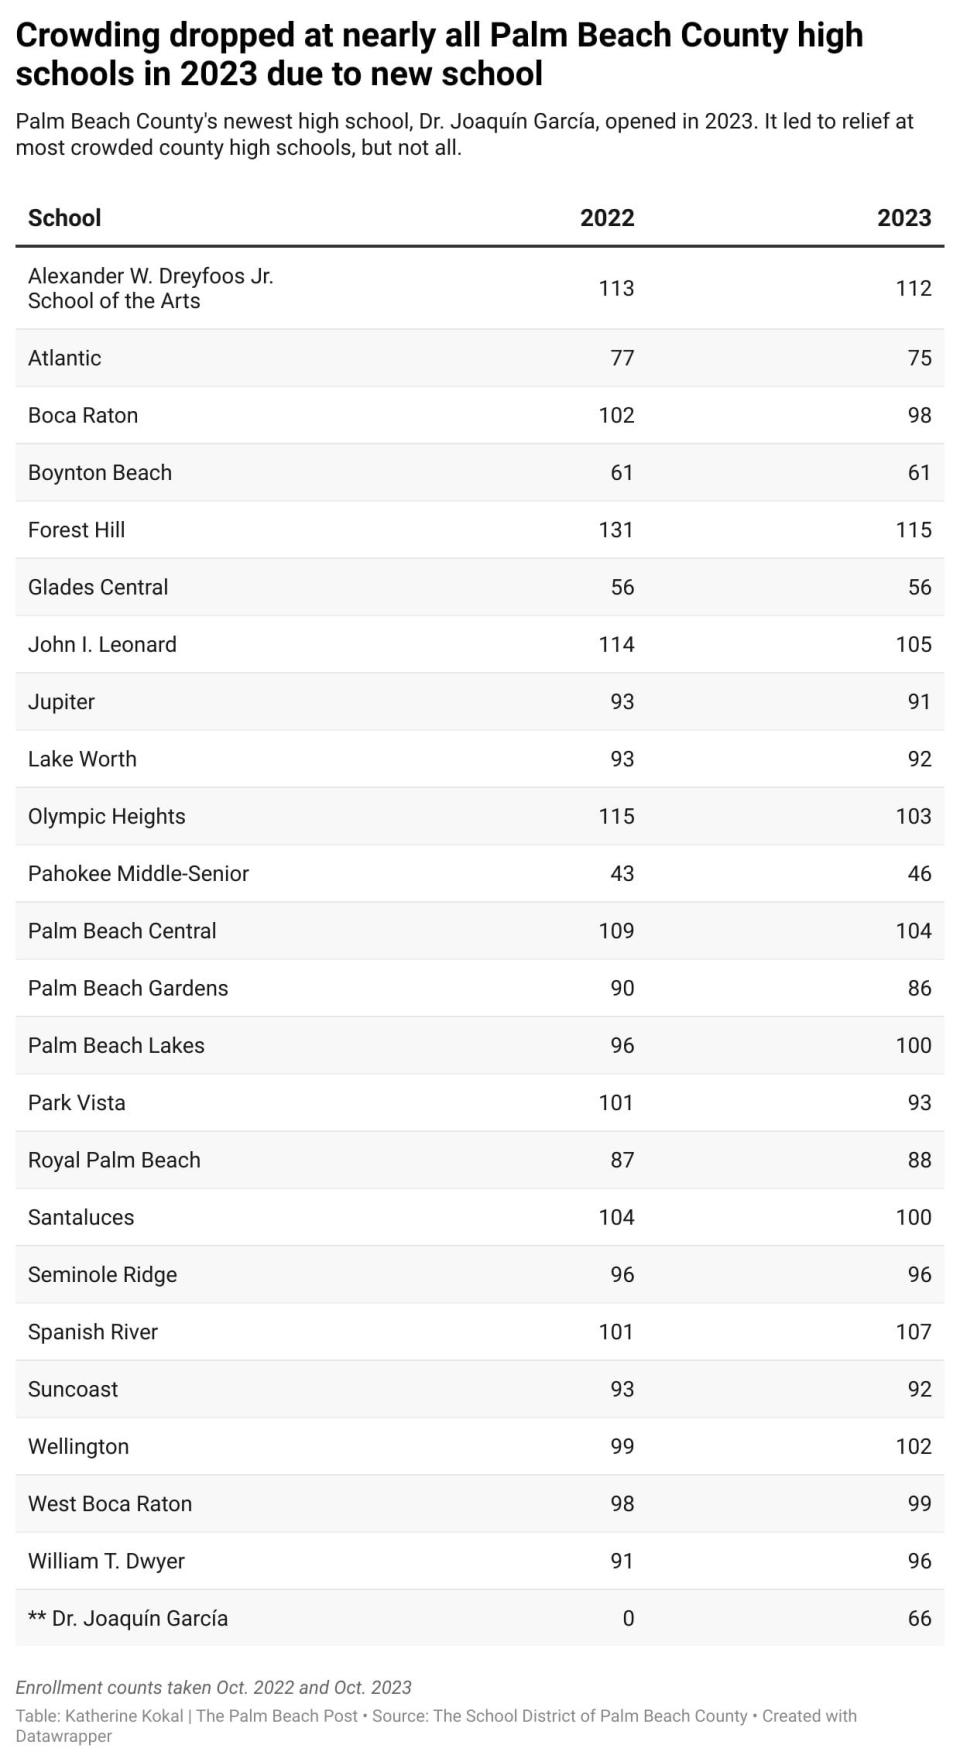 A table shows enrollment rates at Palm Beach County high schools in 2022 and 2023. Most schools in the county's midsection saw a decrease in crowding due to the opening of Dr. Joaquín García High in the western Lake Worth Beach area. Only one bordering school, Wellington High, saw an increase in crowding.